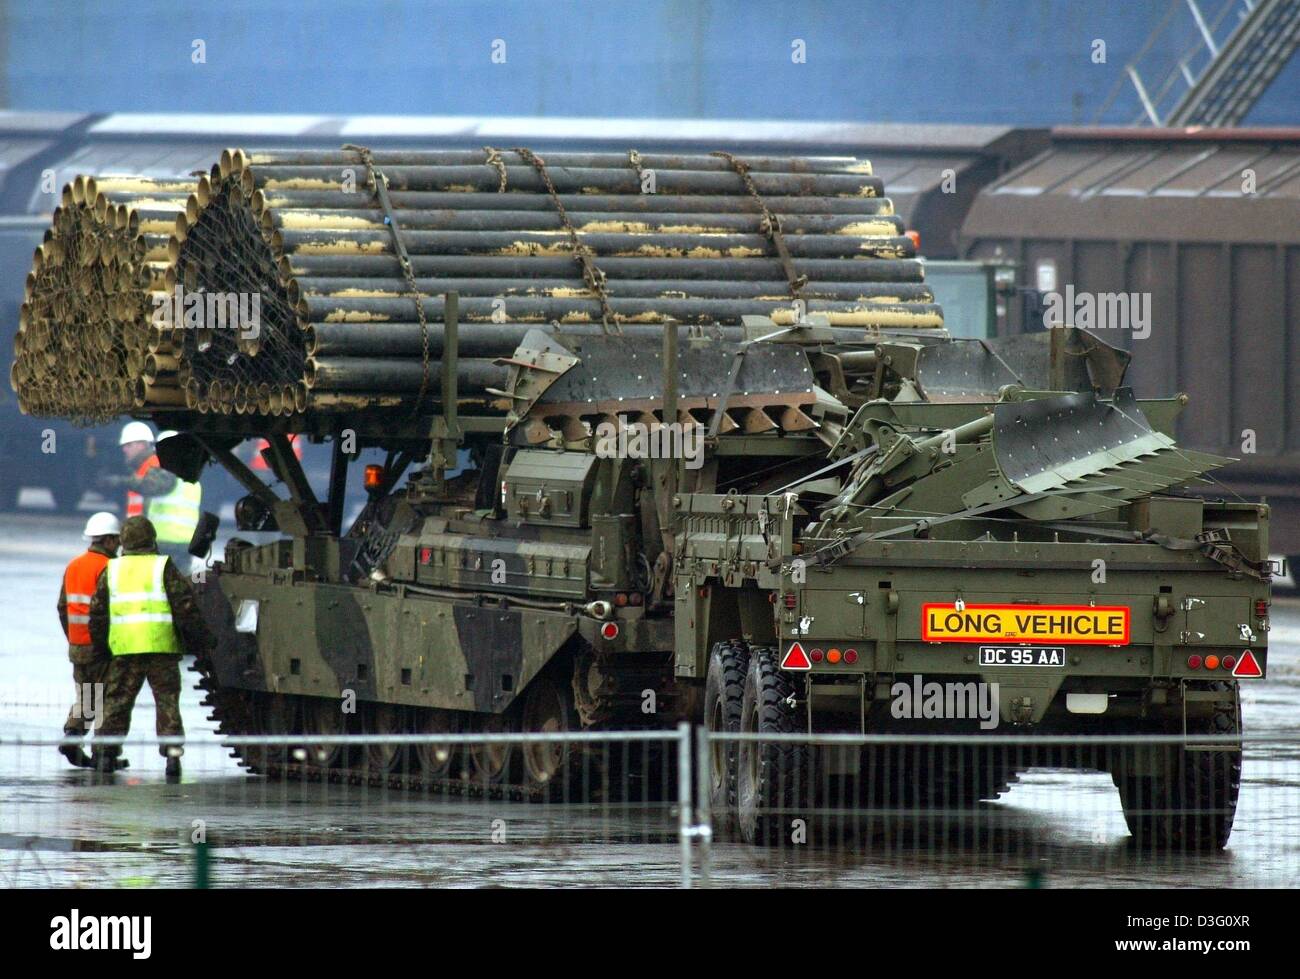 (dpa) - A British tank waits to be loaded onto a cargo ship at the harbour in Emden, Germany, 2 February 2003. This tank belongs to the British military equipment stationed in Germany. It is sent for precautionary reasons to the Gulf region in the context of the conflict with Iraq. Stock Photo